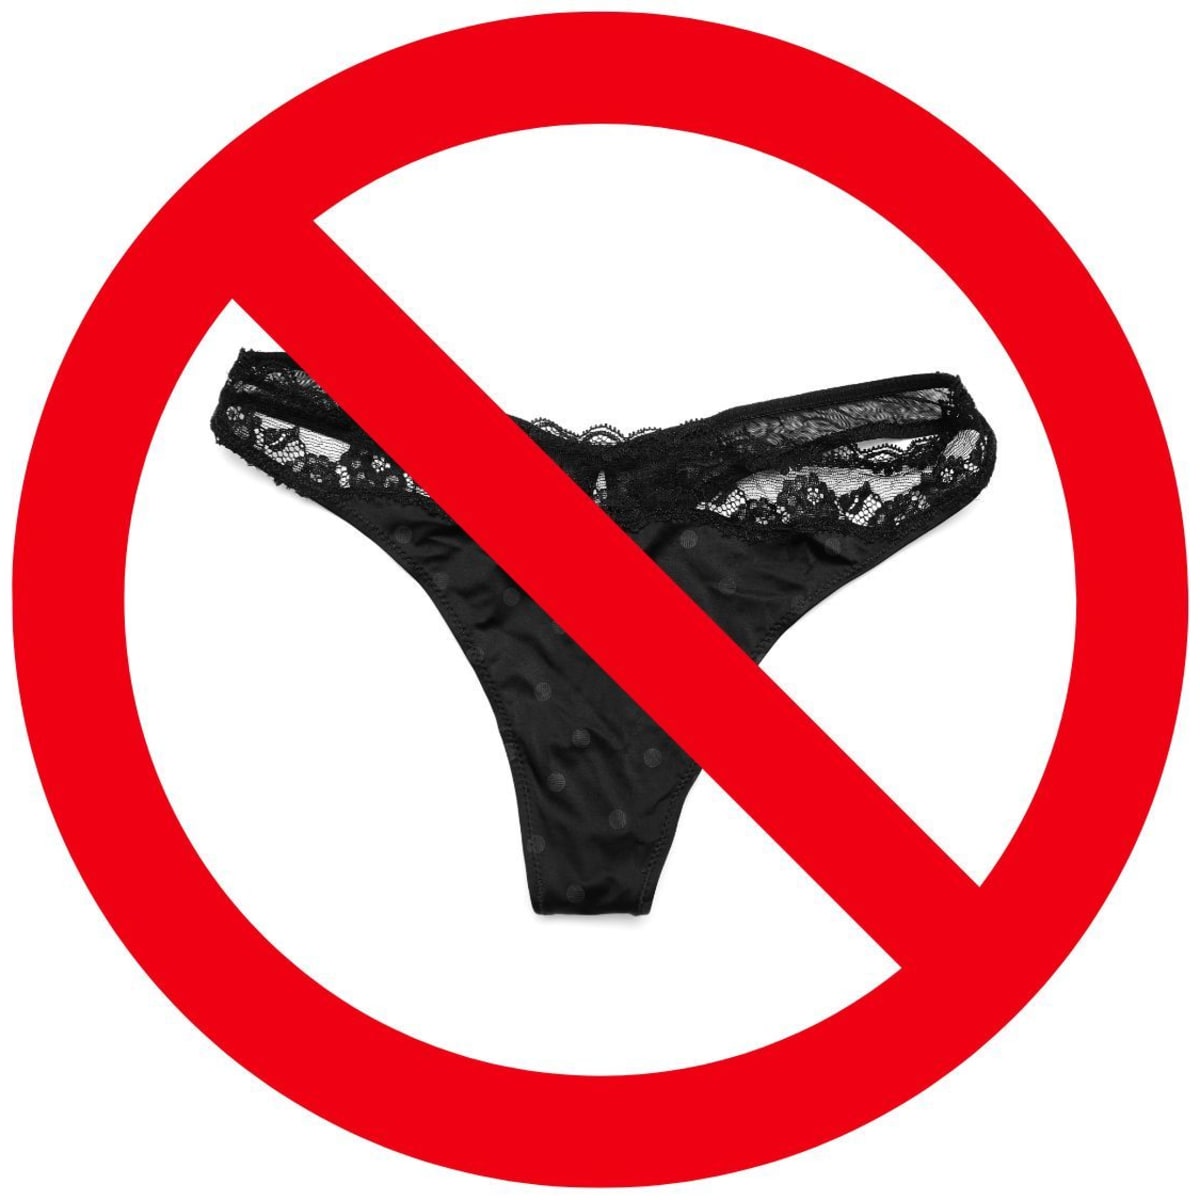 Escape From Panty Prison: How to Quit Wearing Women's Clothing - PairedLife